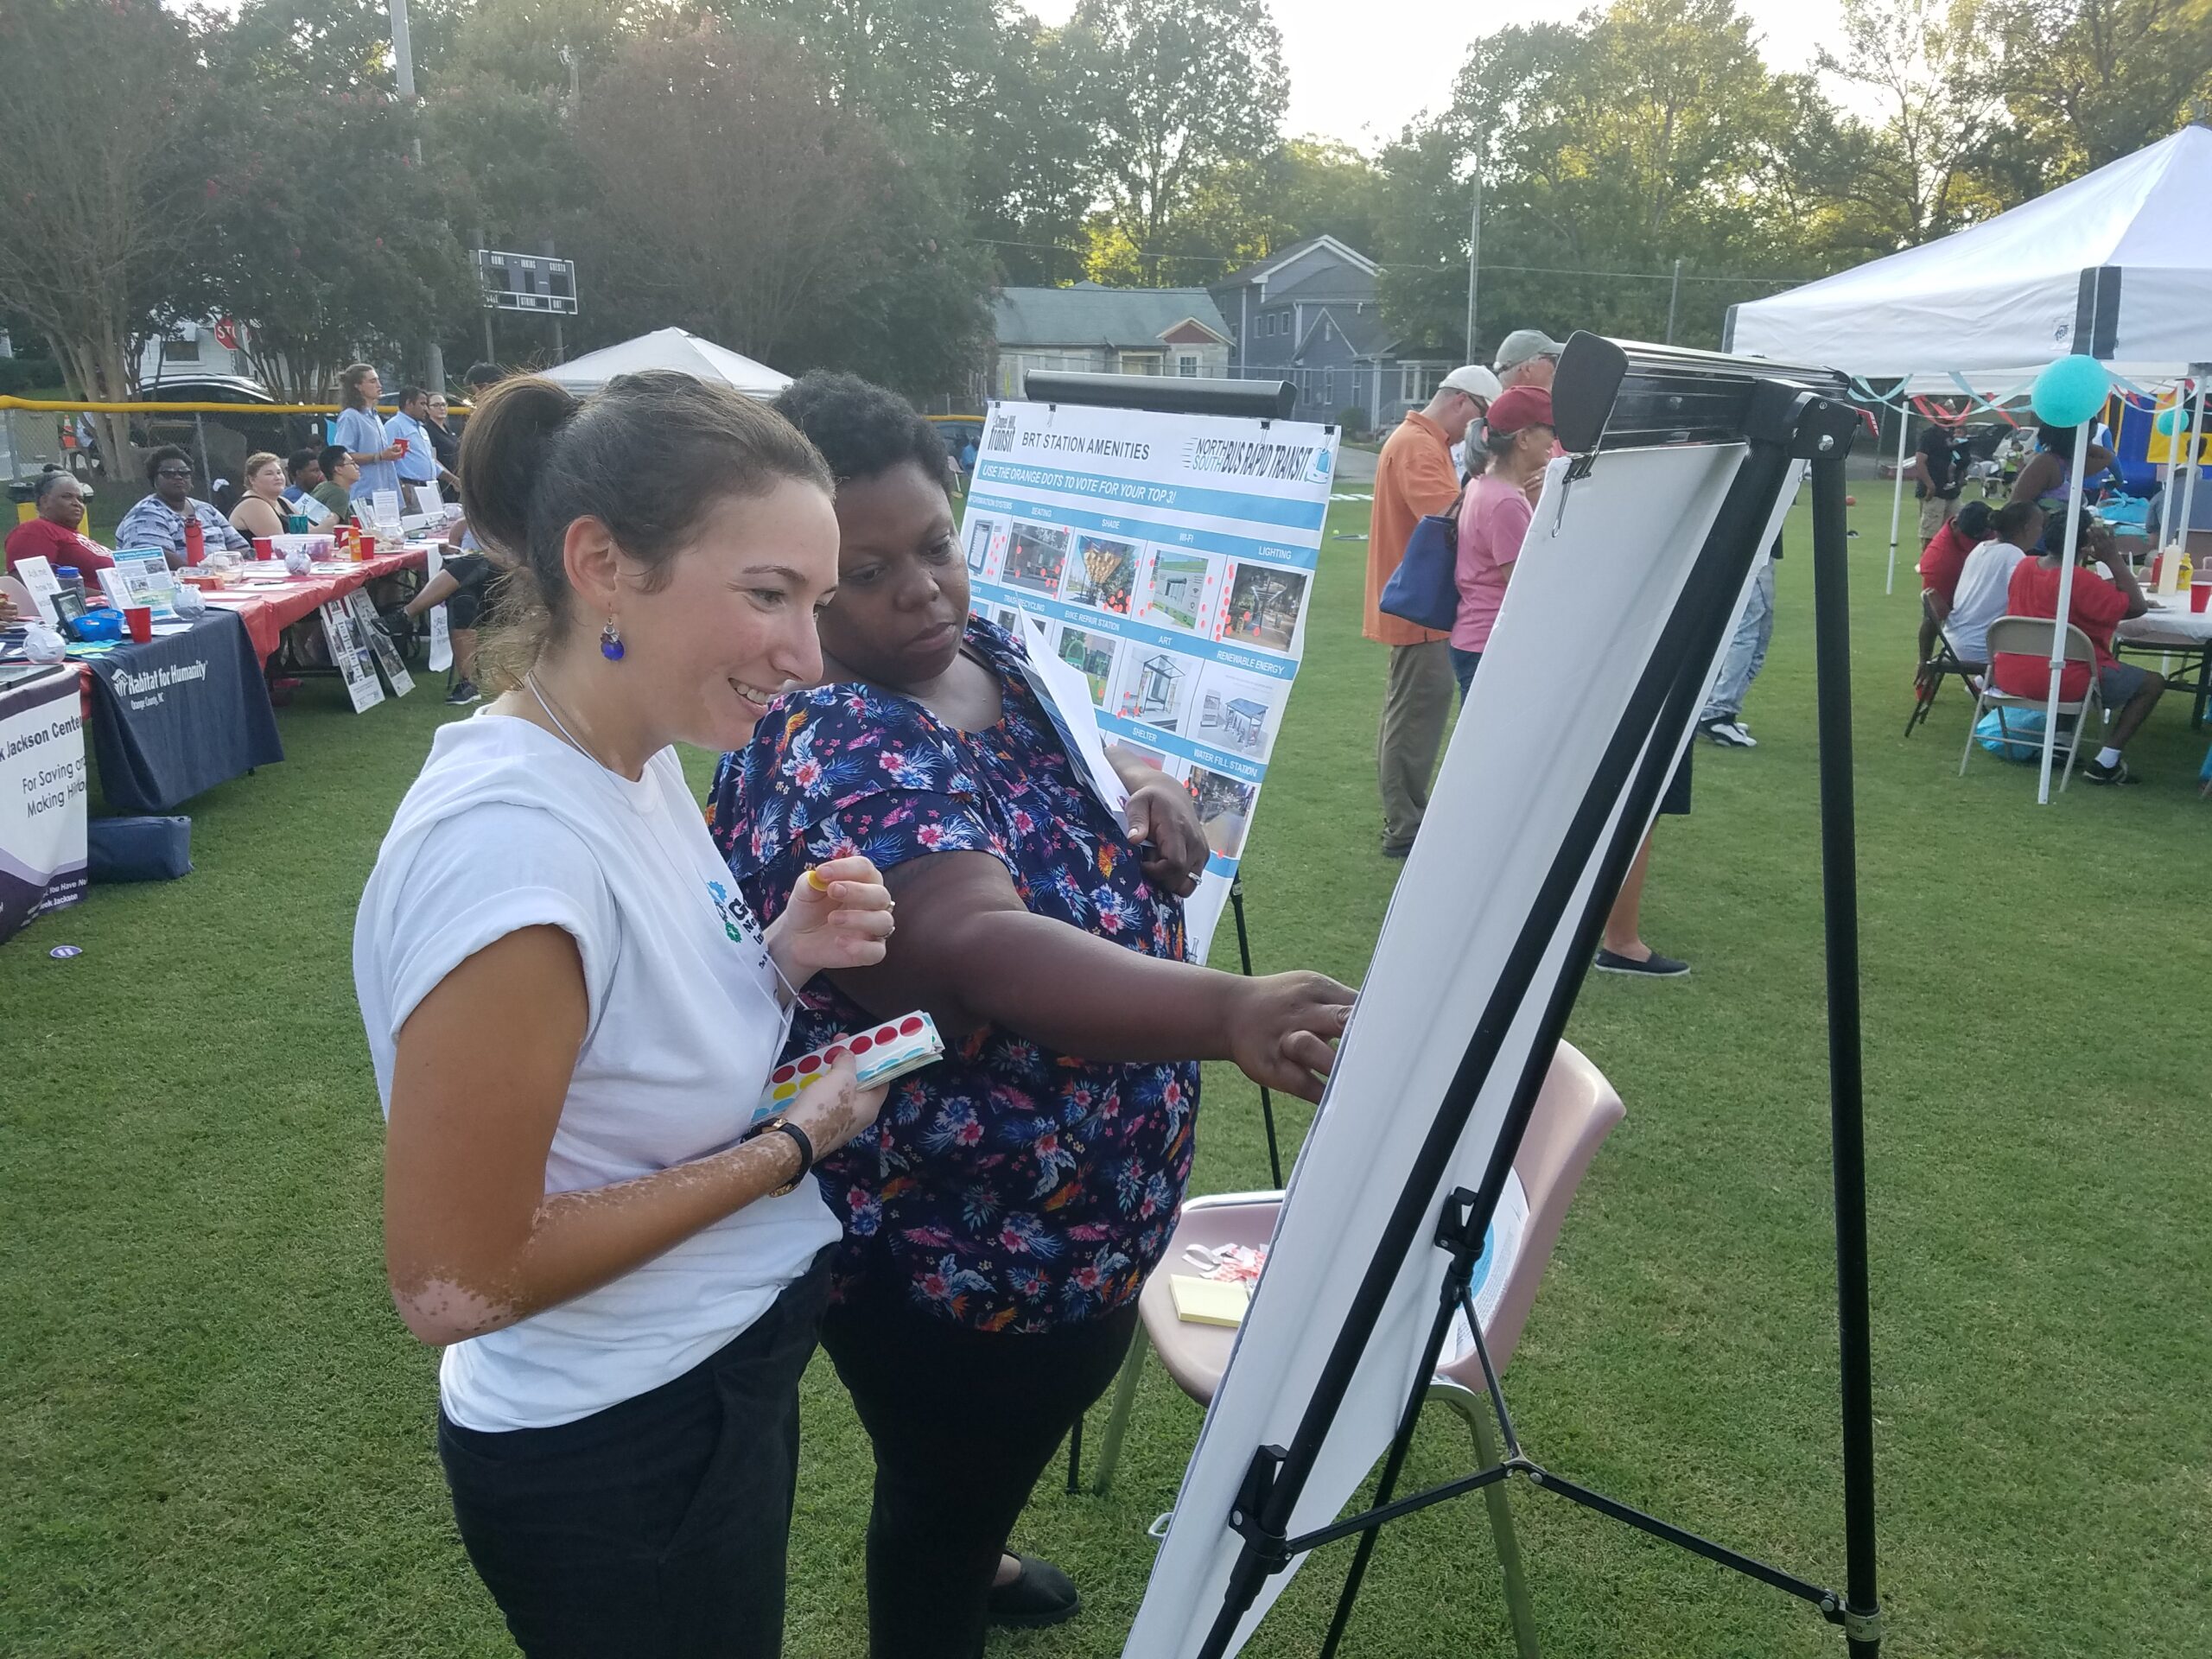 Members of the public viewing informational project boards at the Northside Neighborhood Night Out event.